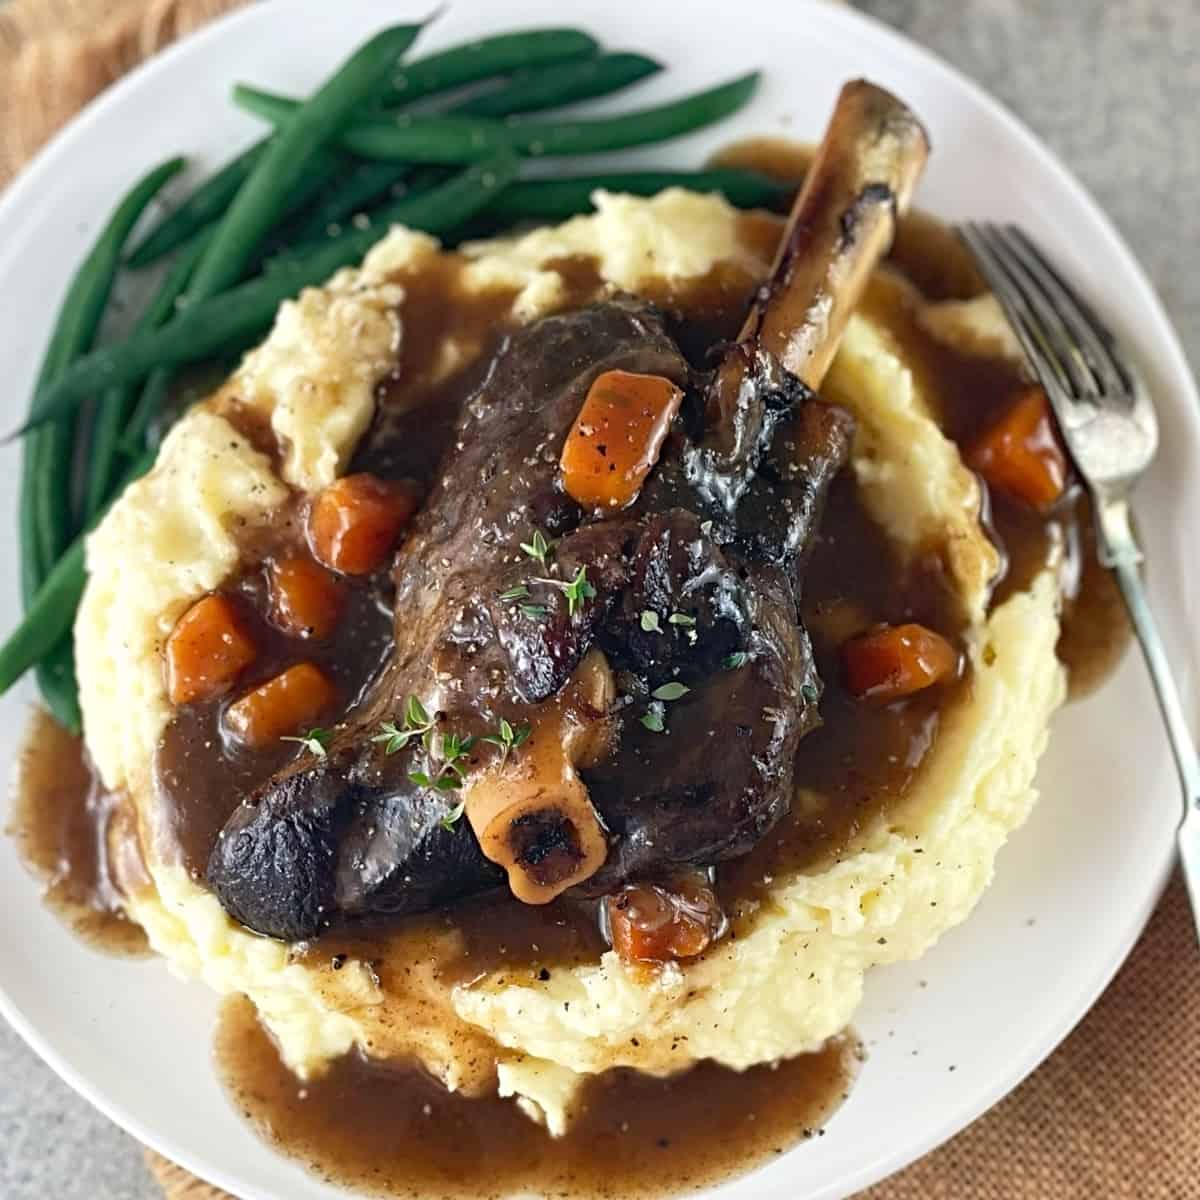 Lamb shank sitting on mashed potato on a white plate with green beans and a fork.